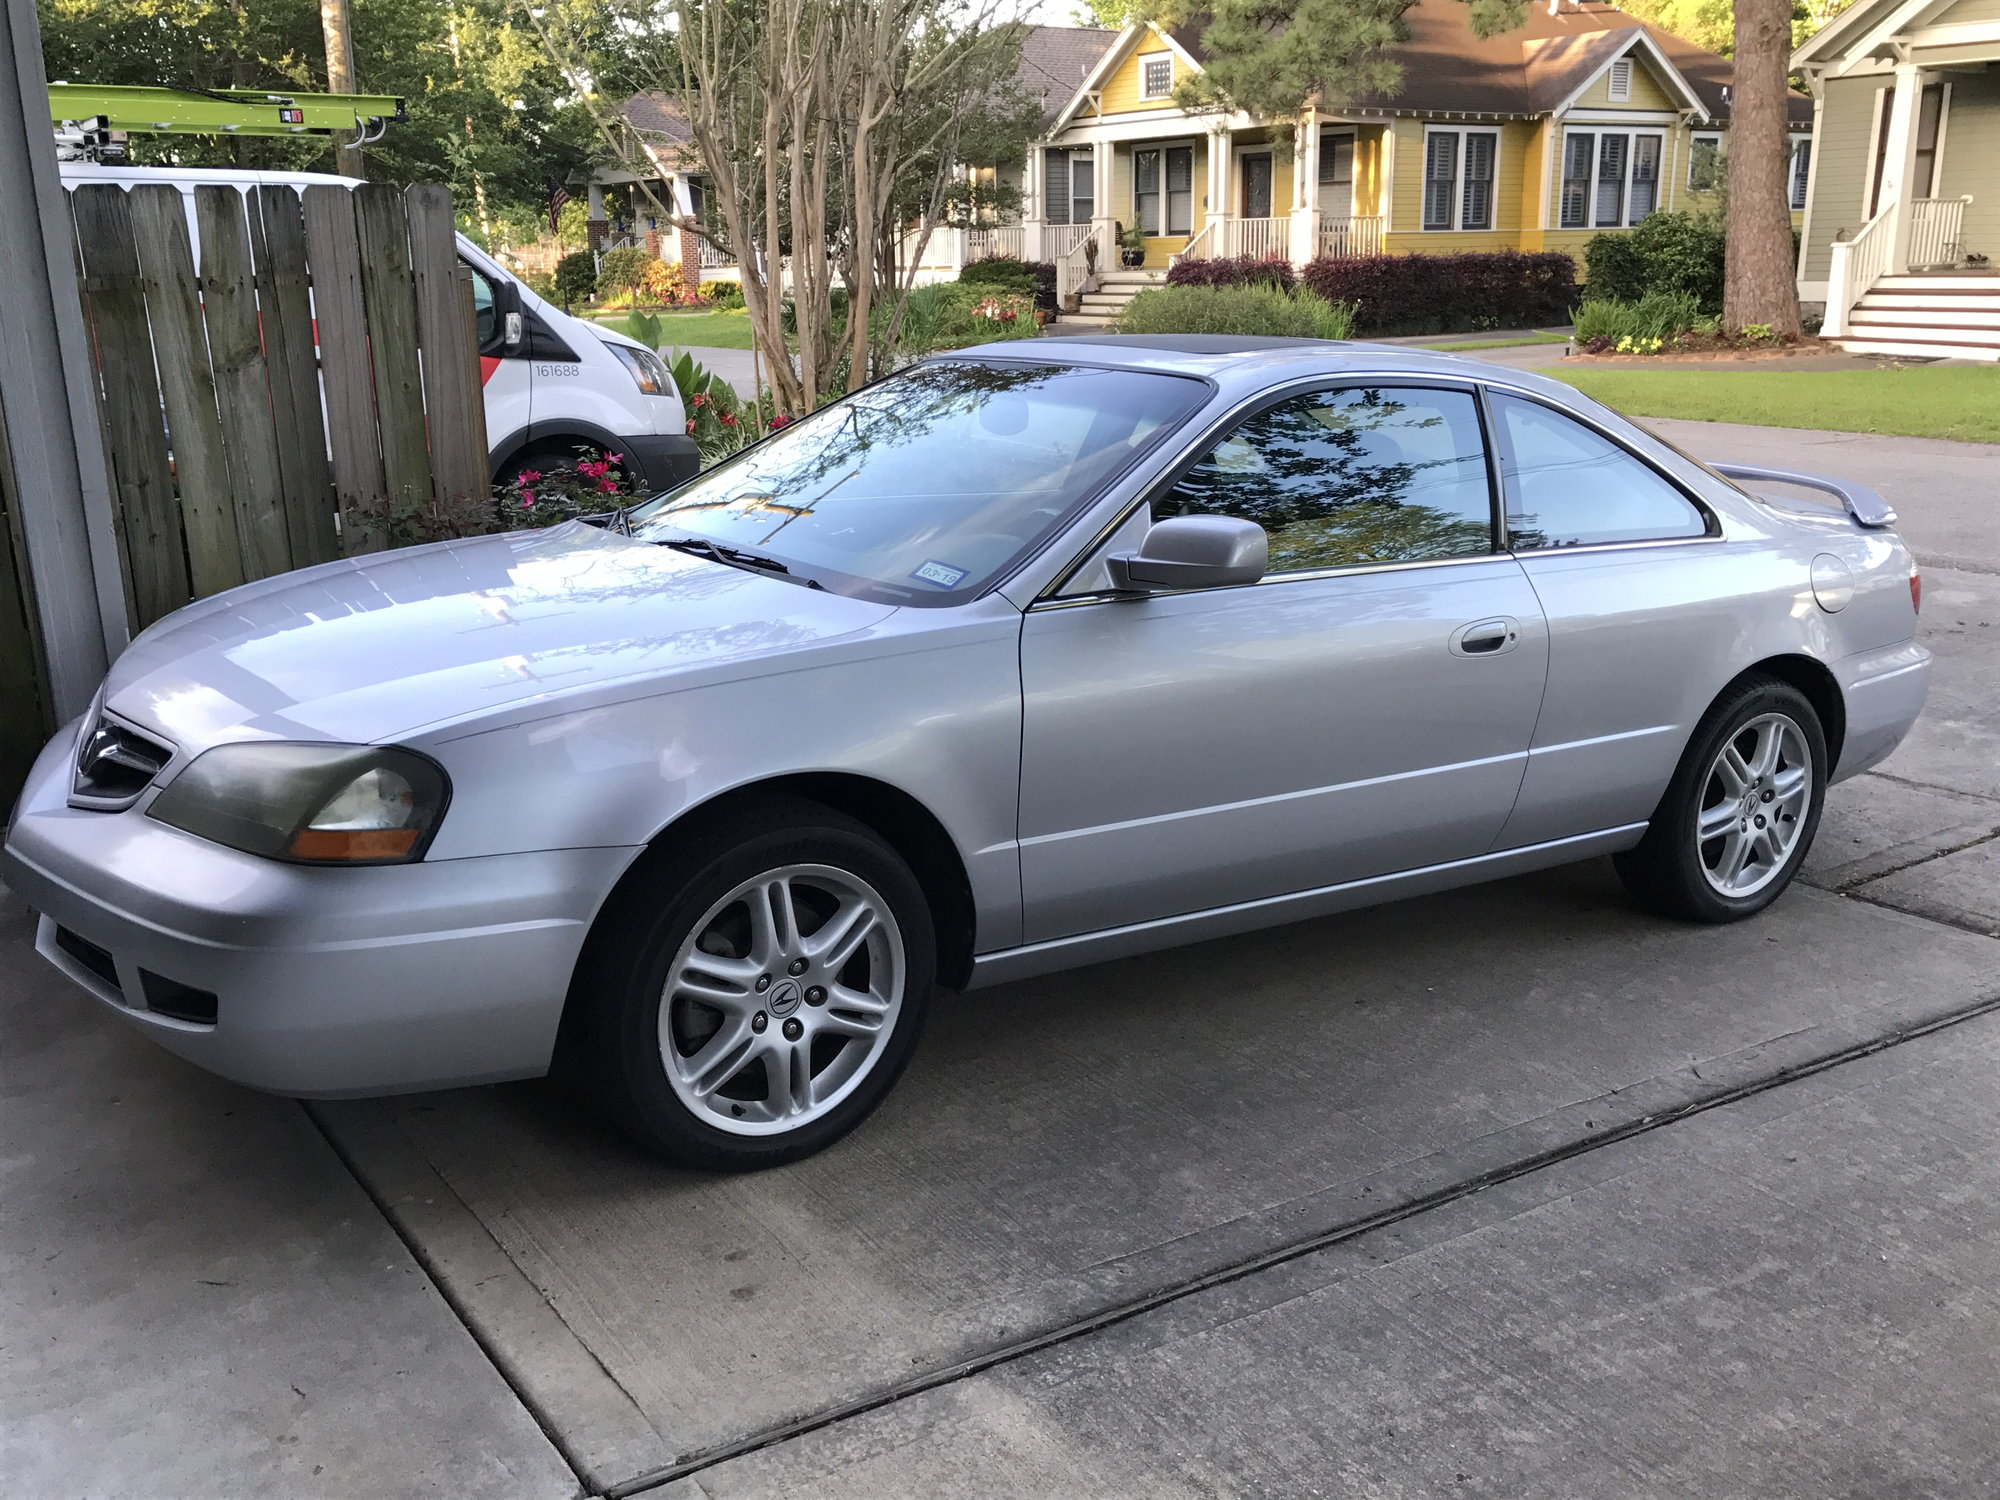 2003 Acura CL - SOLD: 2003 Acura CL-S 6MT - Used - VIN 19UYA41693A007992 - 192,000 Miles - 6 cyl - 2WD - Manual - Coupe - Silver - Houston, TX 77002, United States